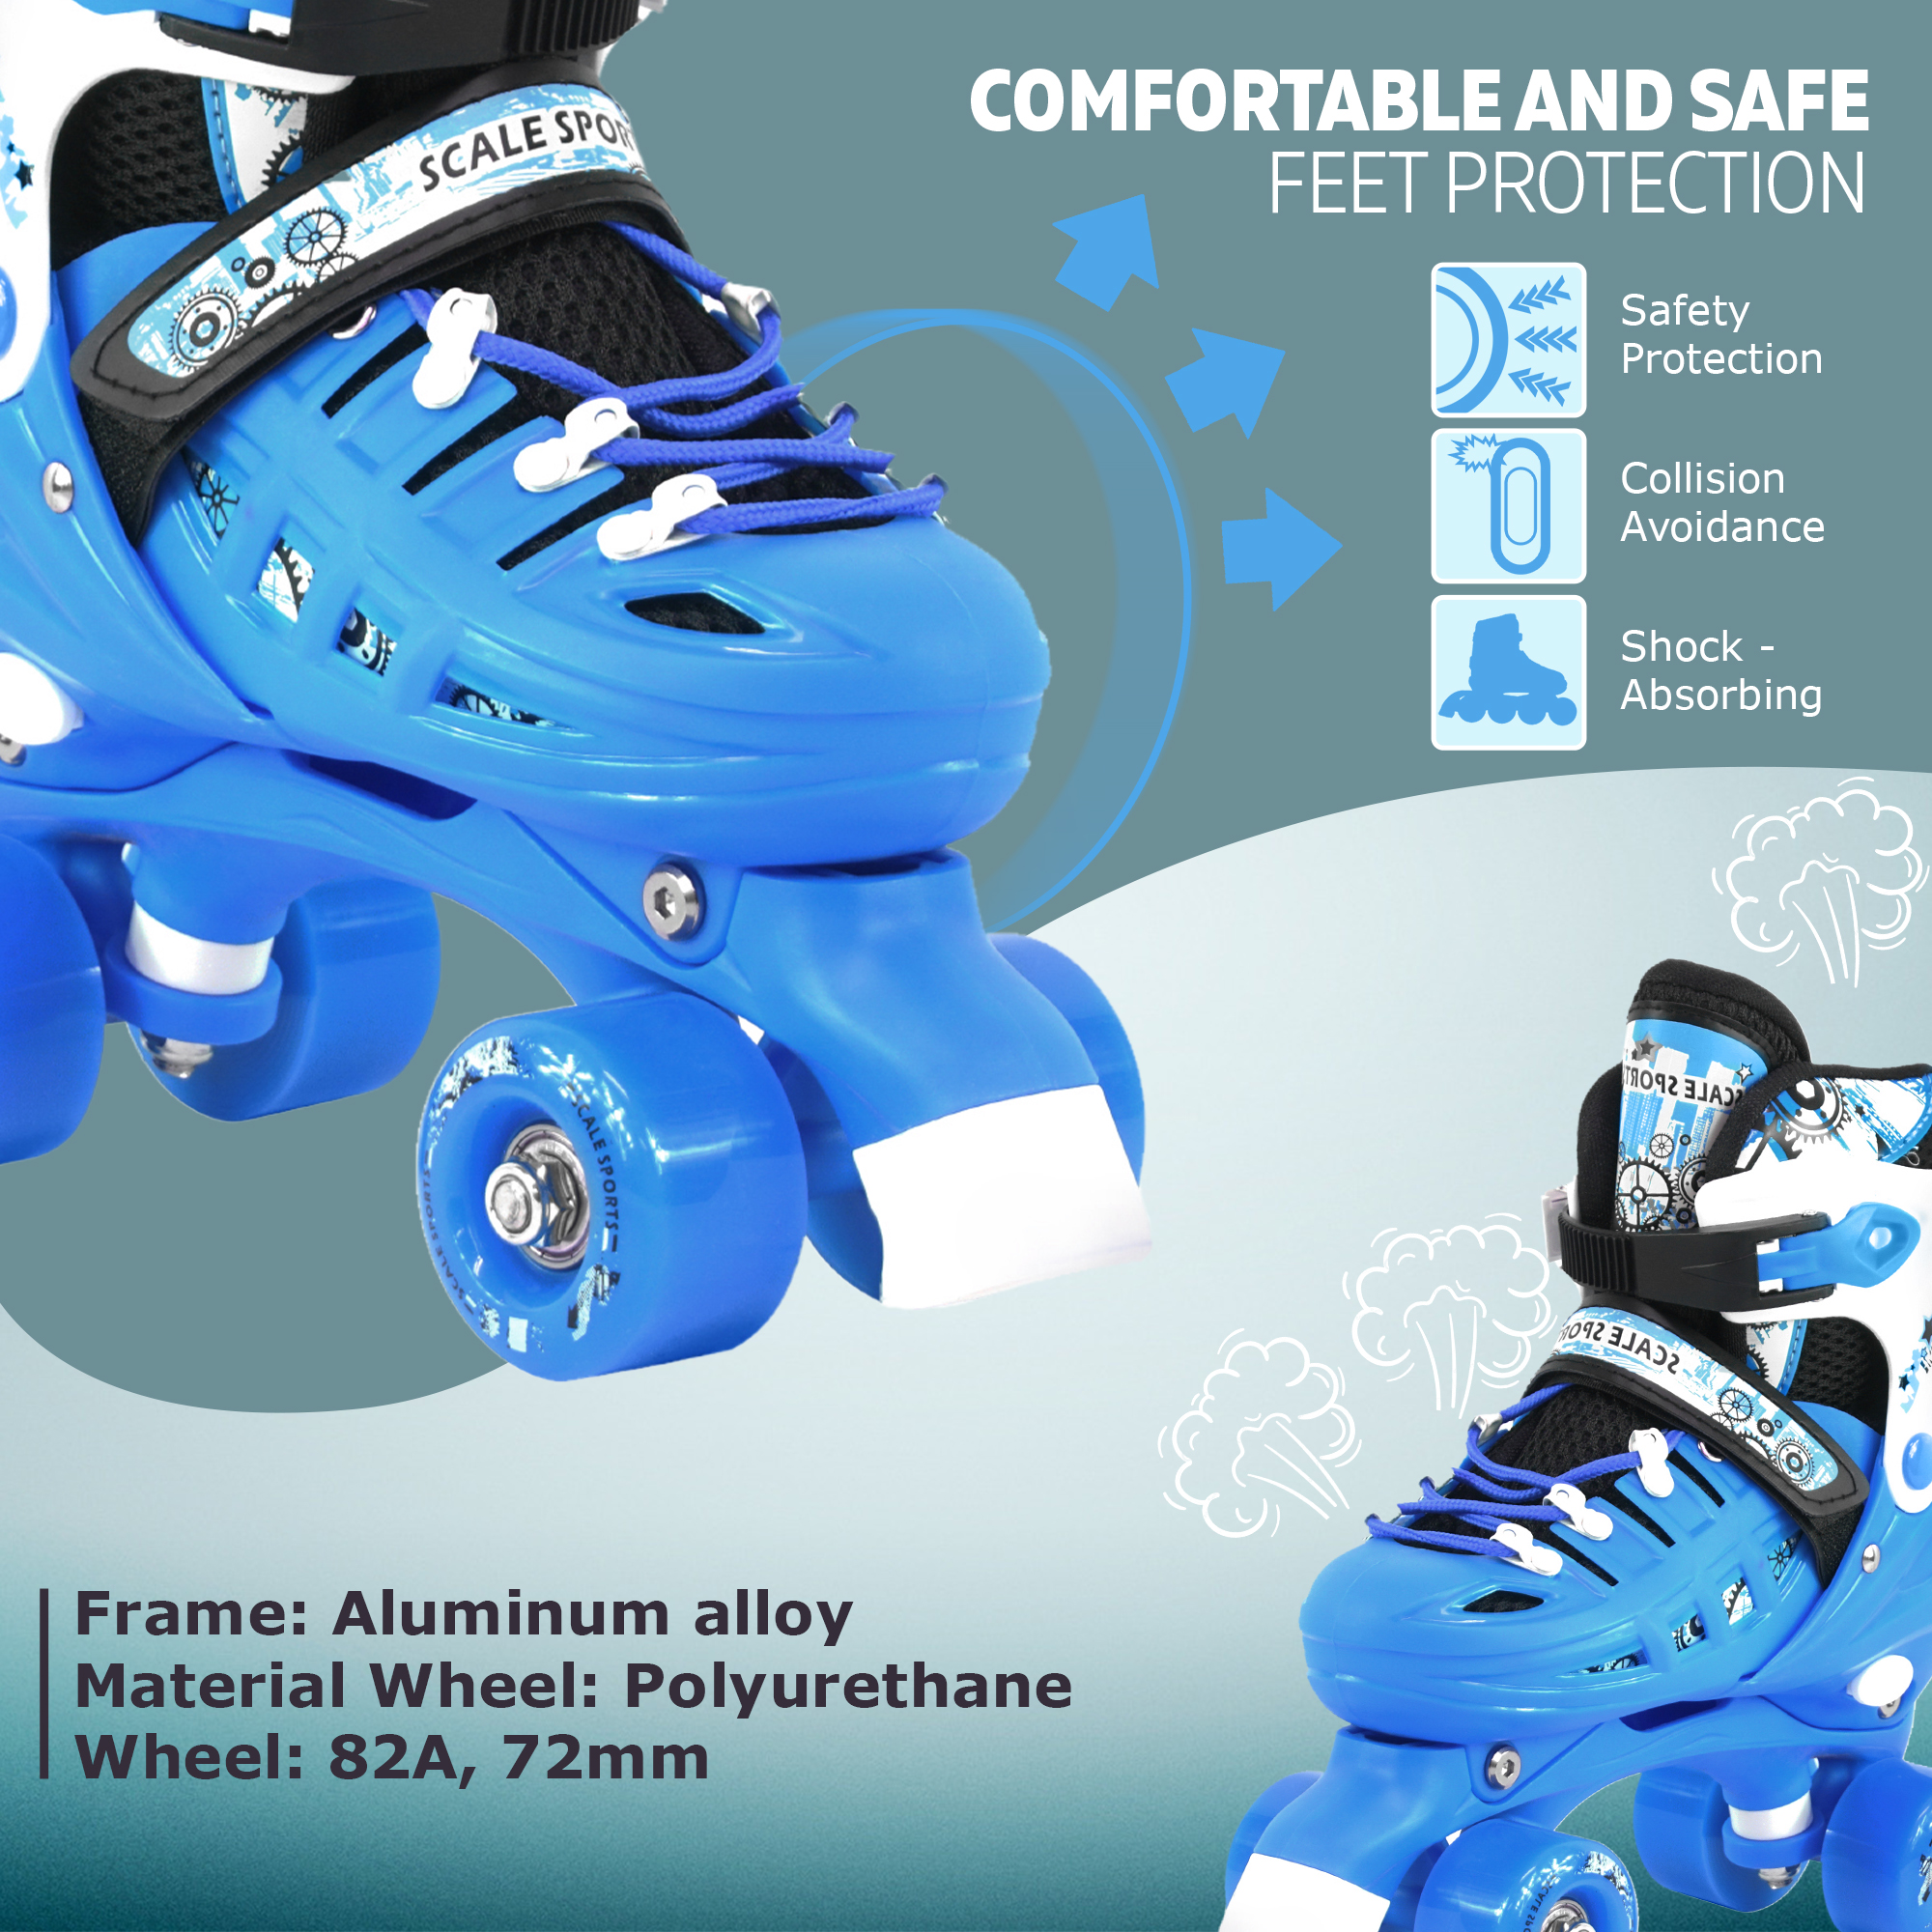 asdasd Quad Roller Skates Universal Boys And Girls Speed Skates For  Children Adjustable Size Suitable For Beginners Blue-S-Blue_Small :  : Sports & Outdoors